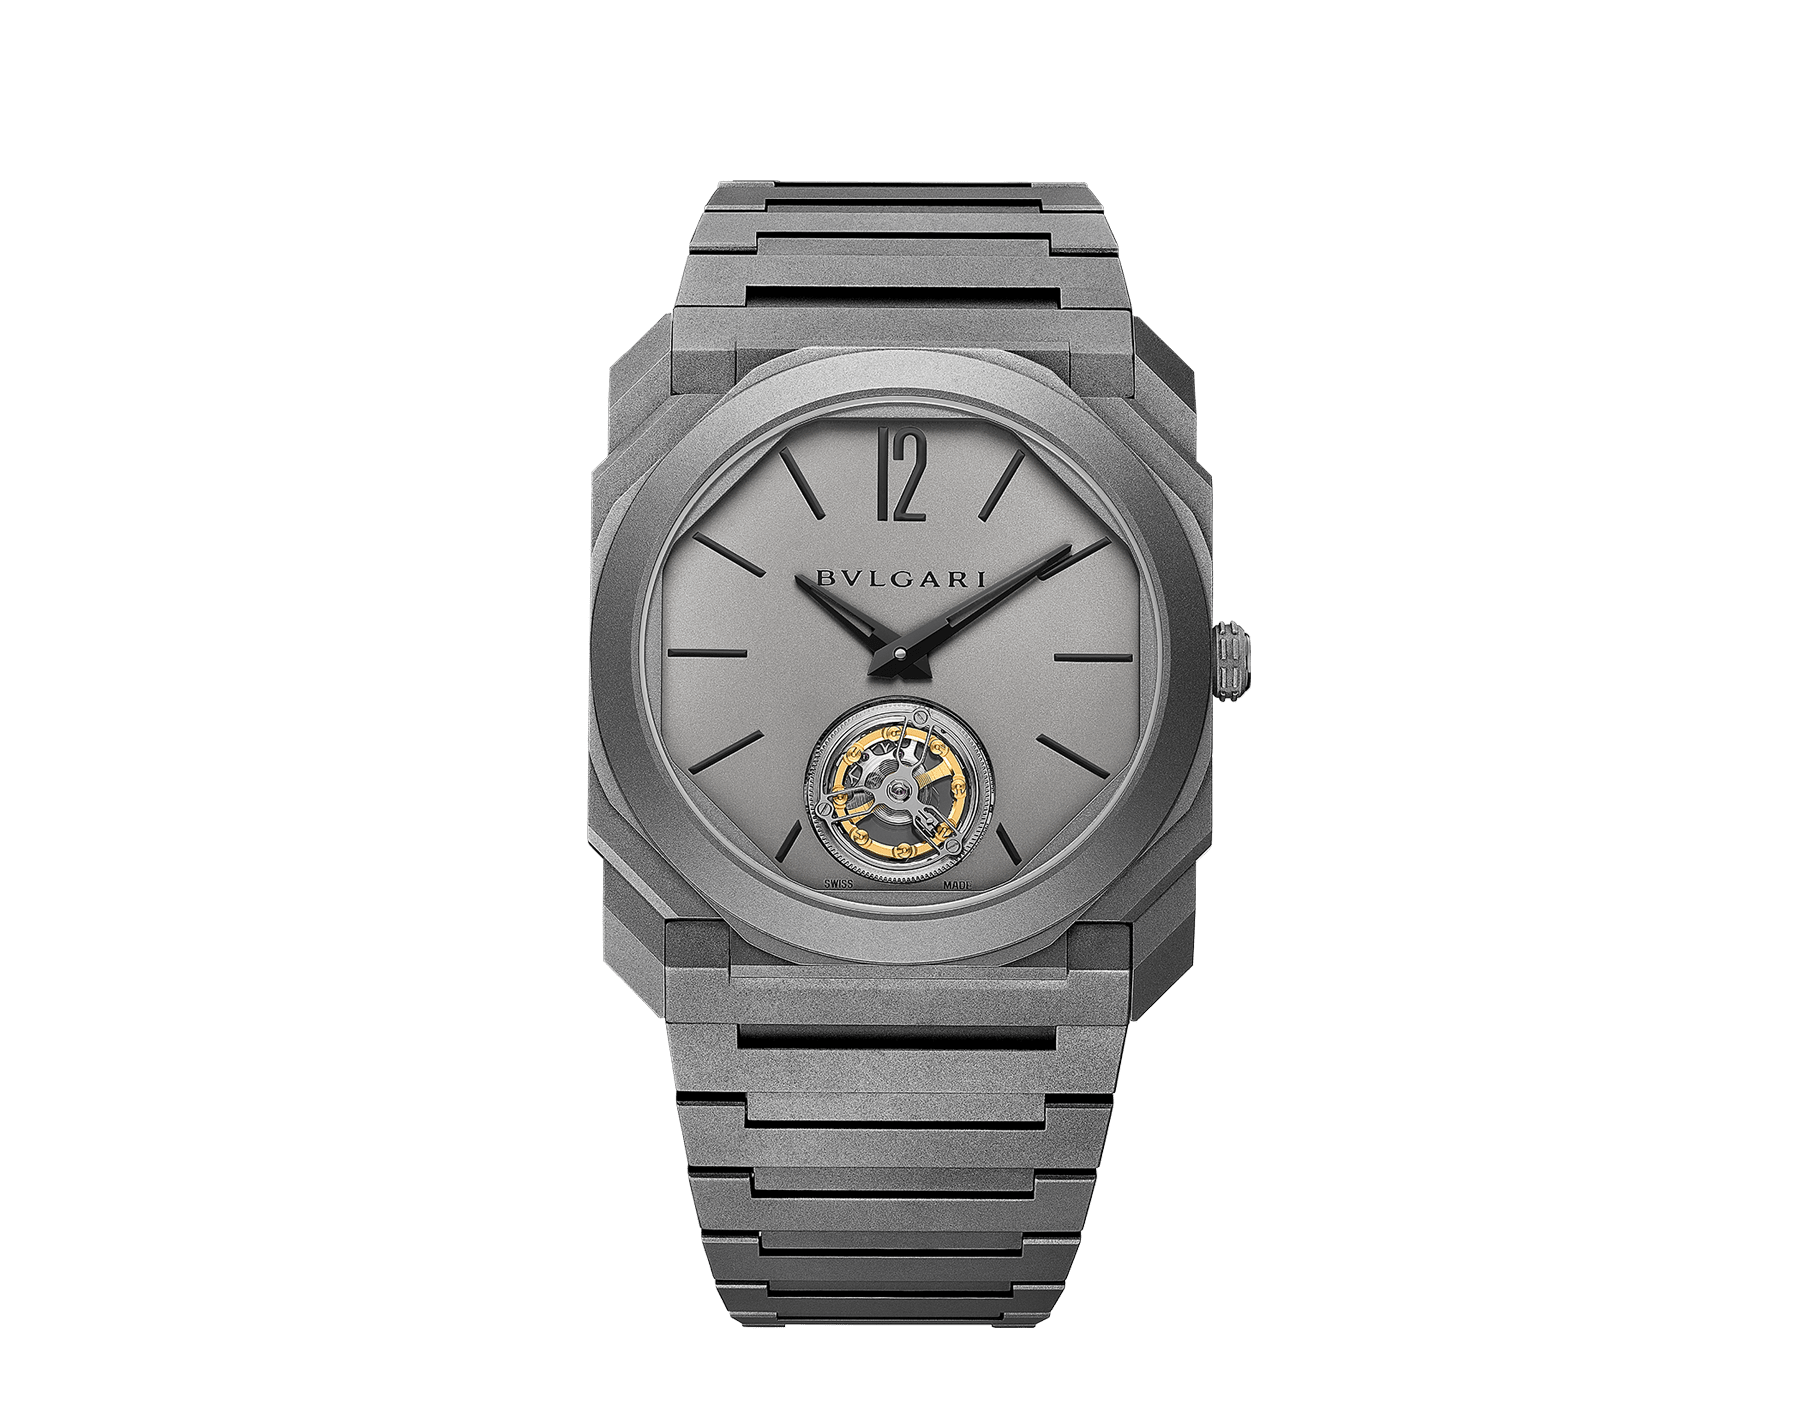 Octo Finissimo Tourbillon watch with mechanical manufacture movement, flying see-through tourbillon, manual winding, sandblasted titanium ultra-thin case, dial and bracelet 103016 image 1